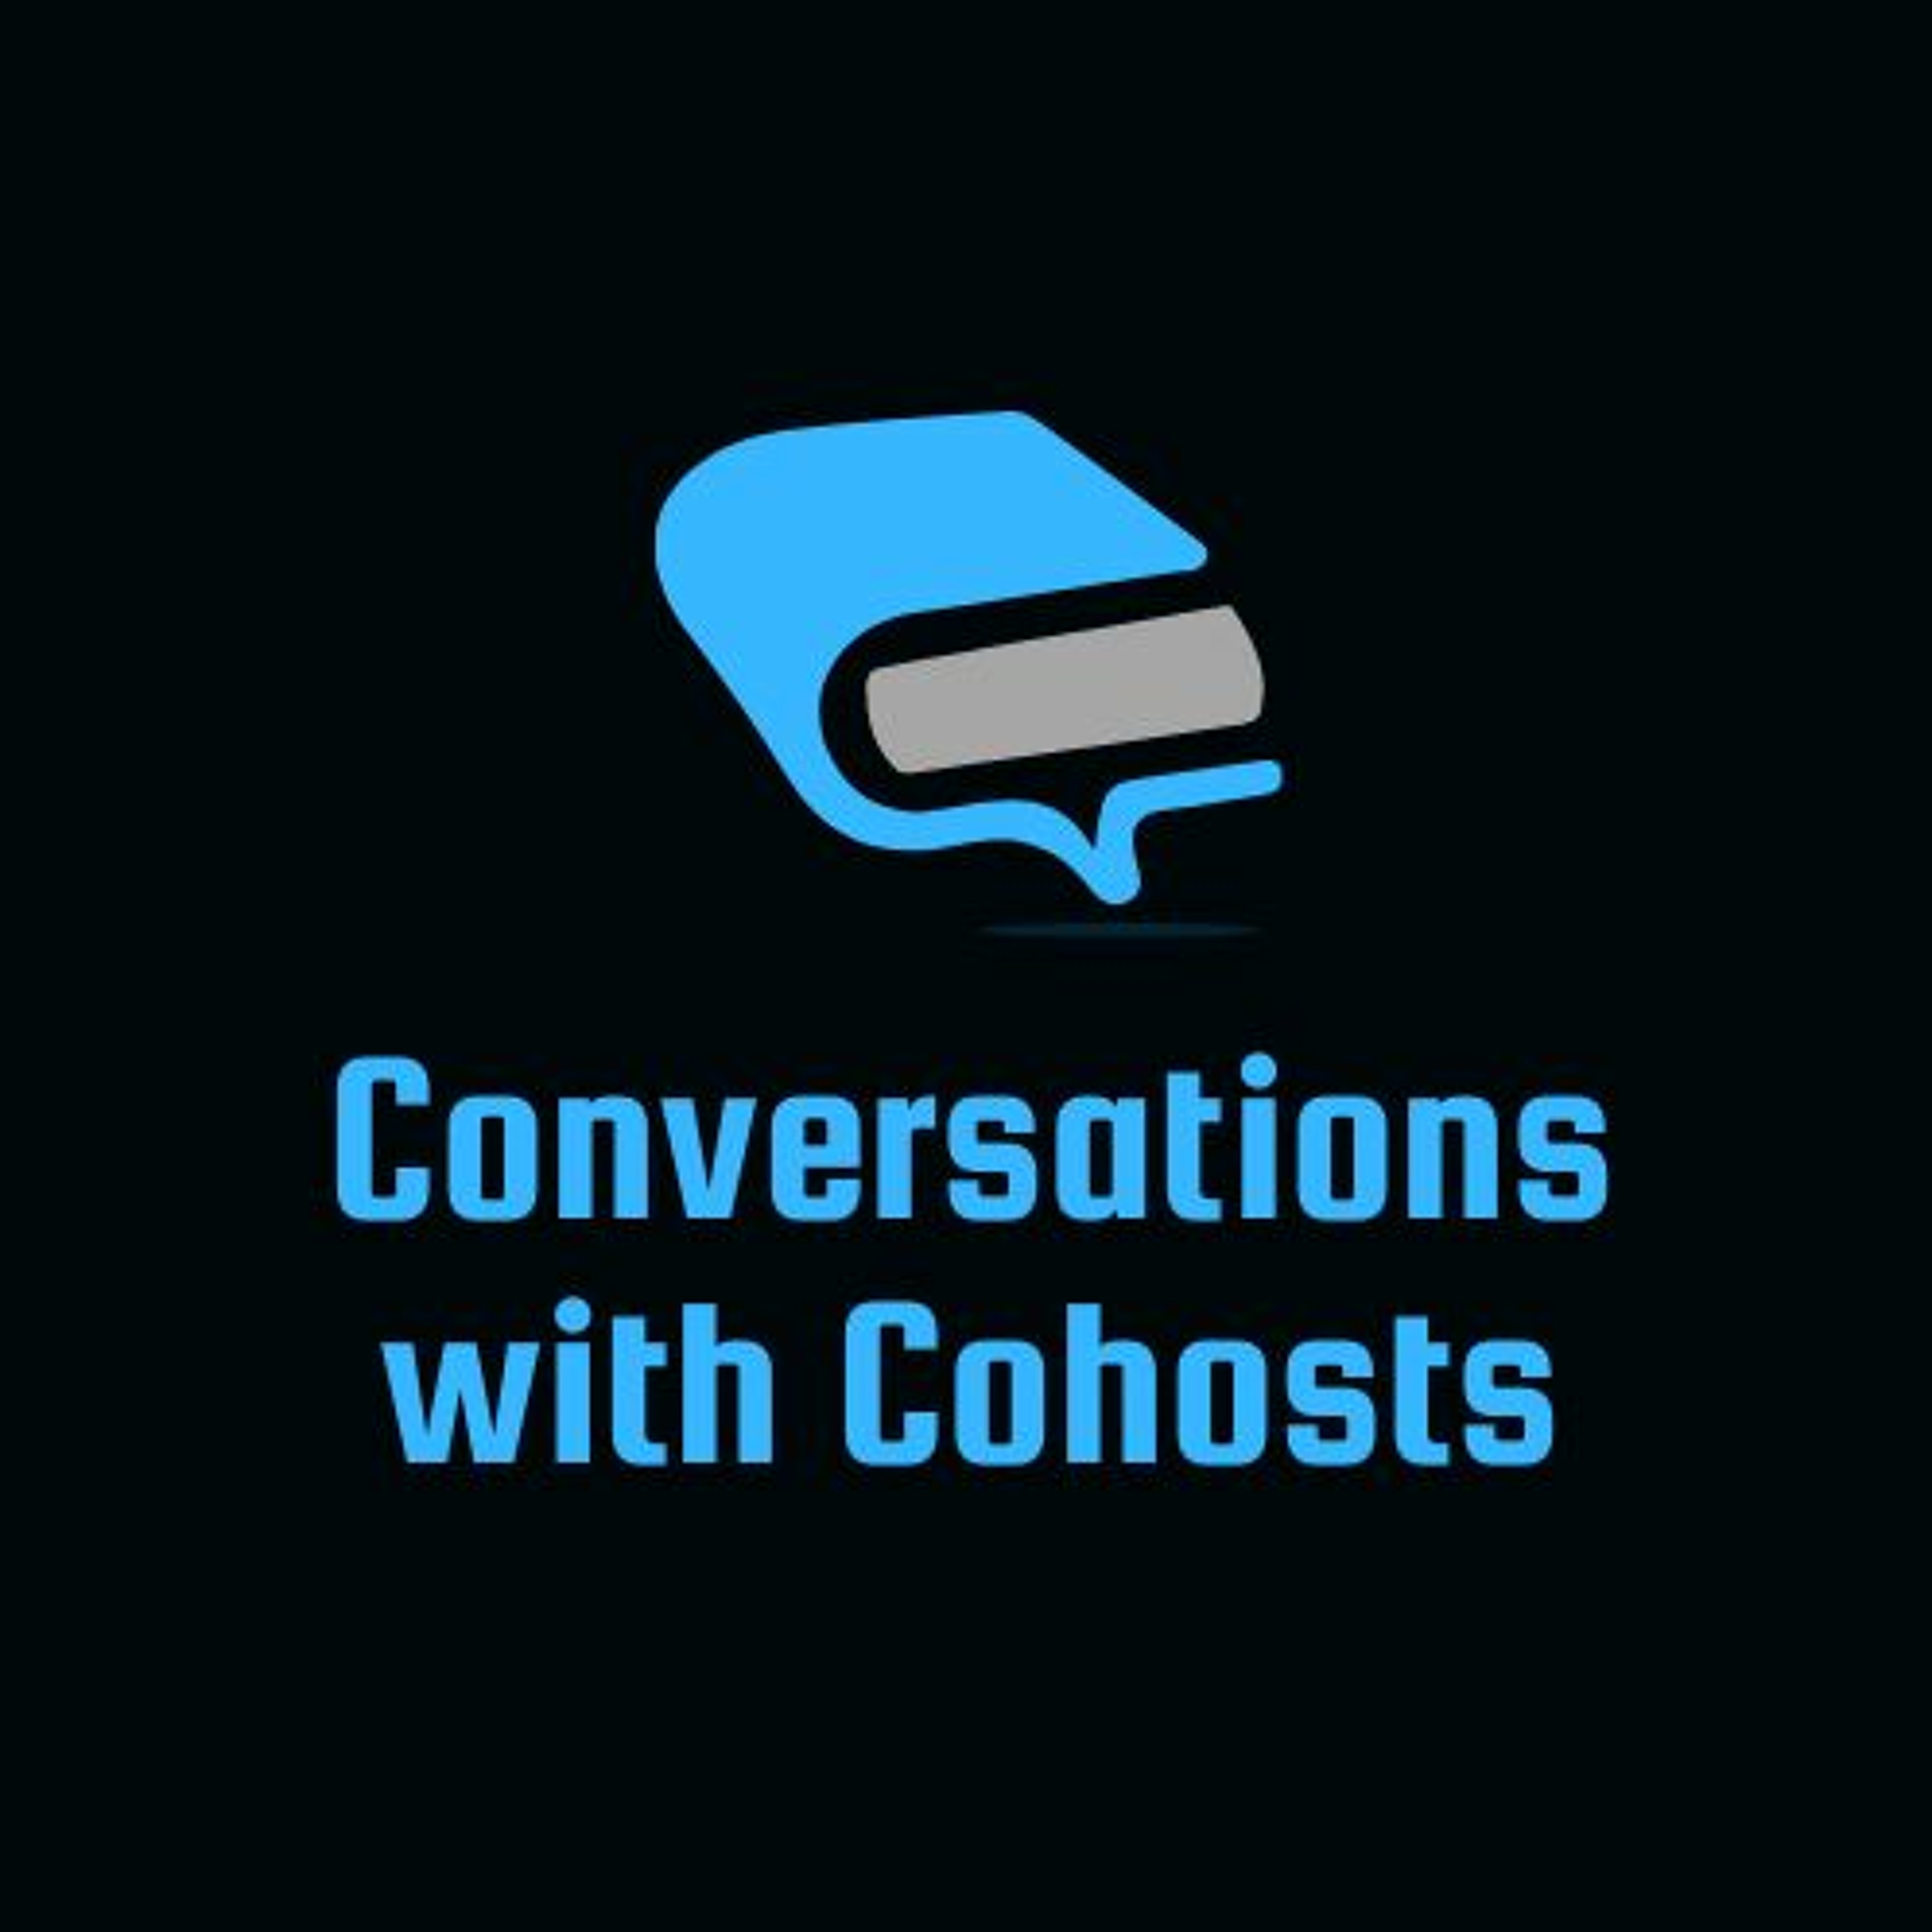 S5E01 - Conversations with CoHosts